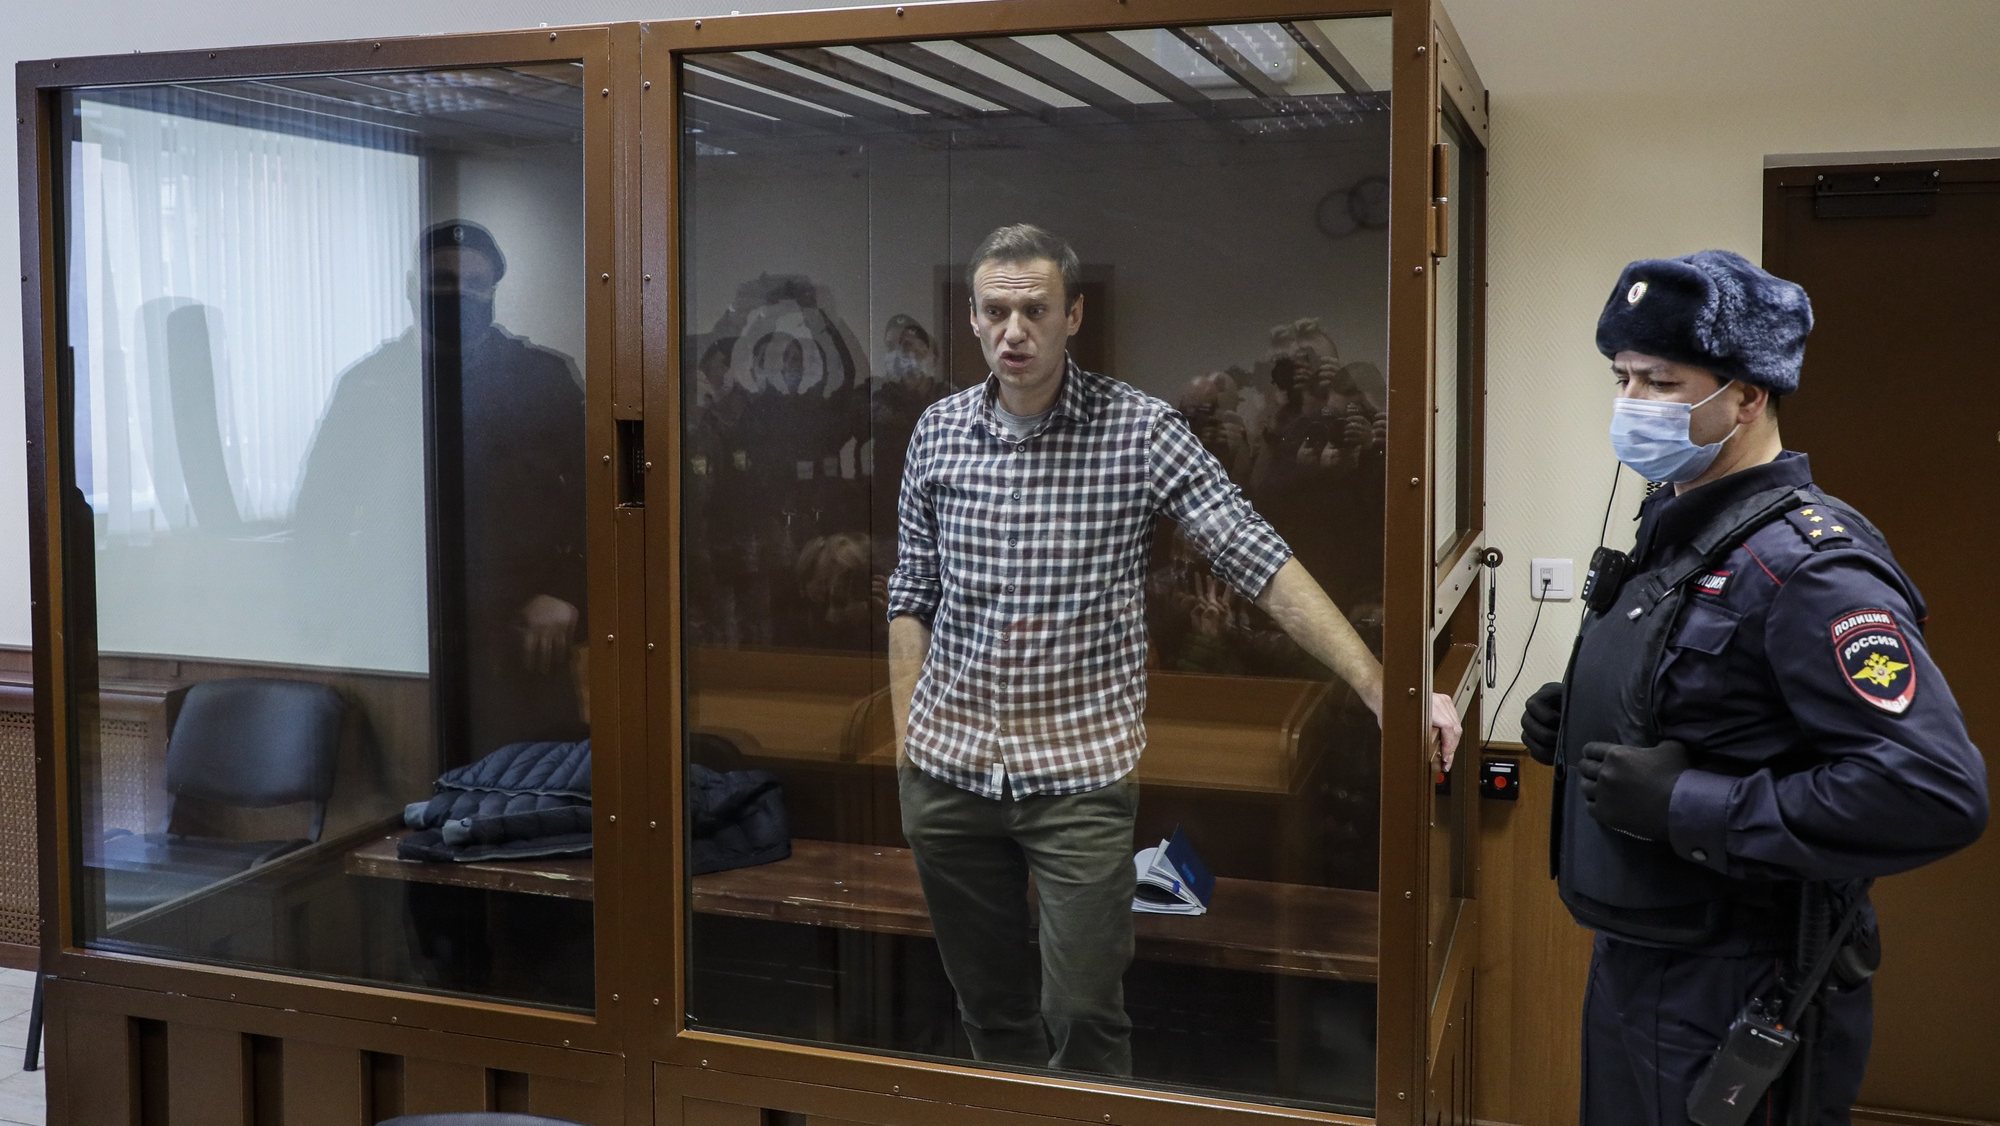 epa09025239 Russian opposition leader Alexei Navalny (C) stands inside a glass cage prior to a hearing at the Babushkinsky District Court in Moscow, Russia, 20 February 2021. The Moscow City court will hold a visiting session at the Babushkinsky District Court Building to consider Navalny&#039;s lawyers appeal against a court verdict issued on 02 February 2021, to replace the suspended sentence issued to Navalny in the Yves Rocher embezzlement case with an actual term in a penal colony.  EPA/YURI KOCHETKOV MANDATORY CREDIT